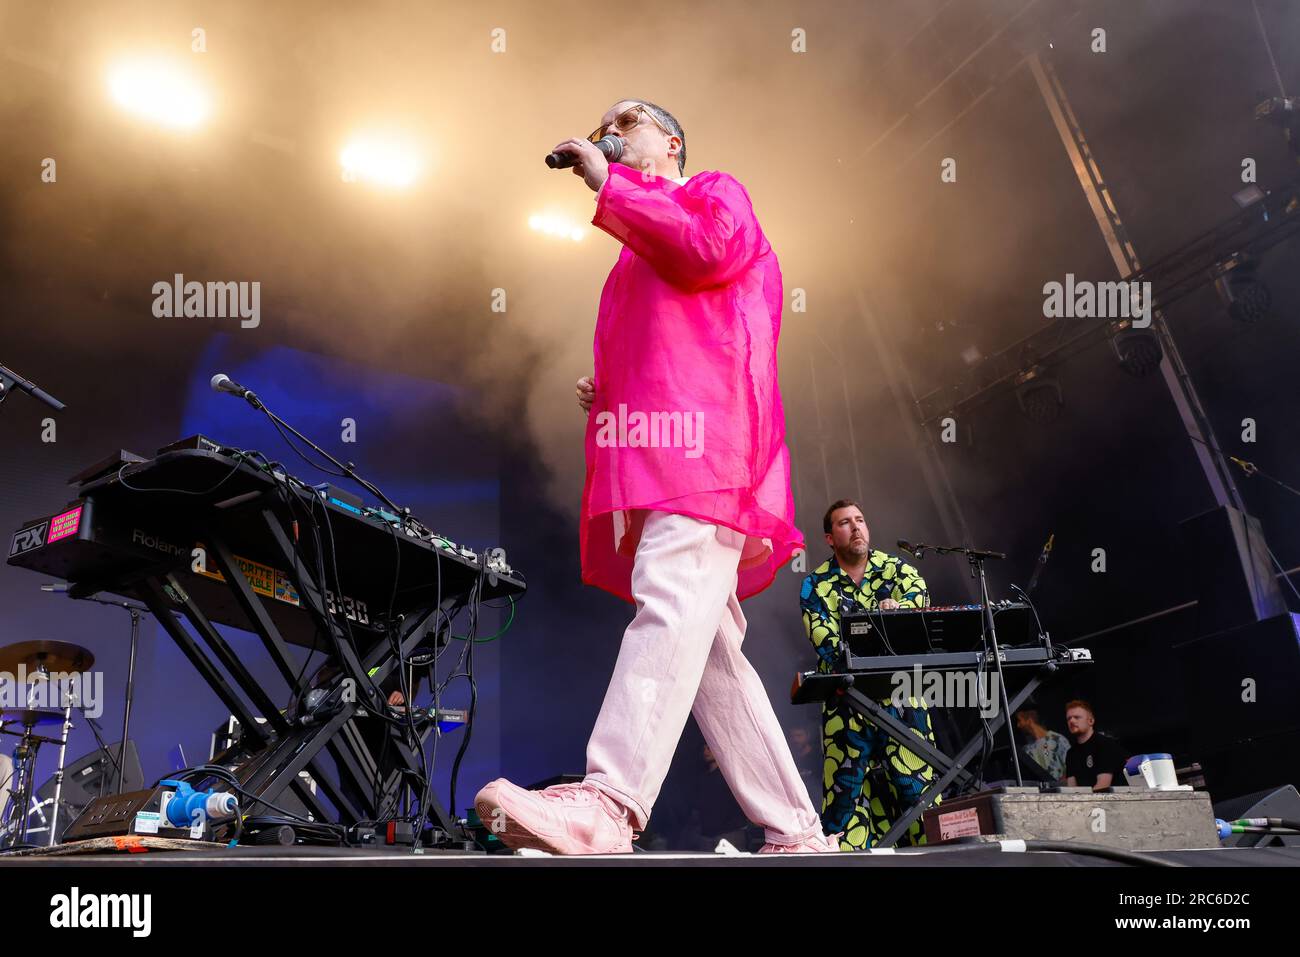 Stanmer Park, City of Brighton & Hove, East Sussex, UK. Hot Chip performing at The Brighton Valley Festival 2023, Brighton Concert Series, Stanmer Park .8th July 2023. David Smith/Alamy Live News Stock Photo